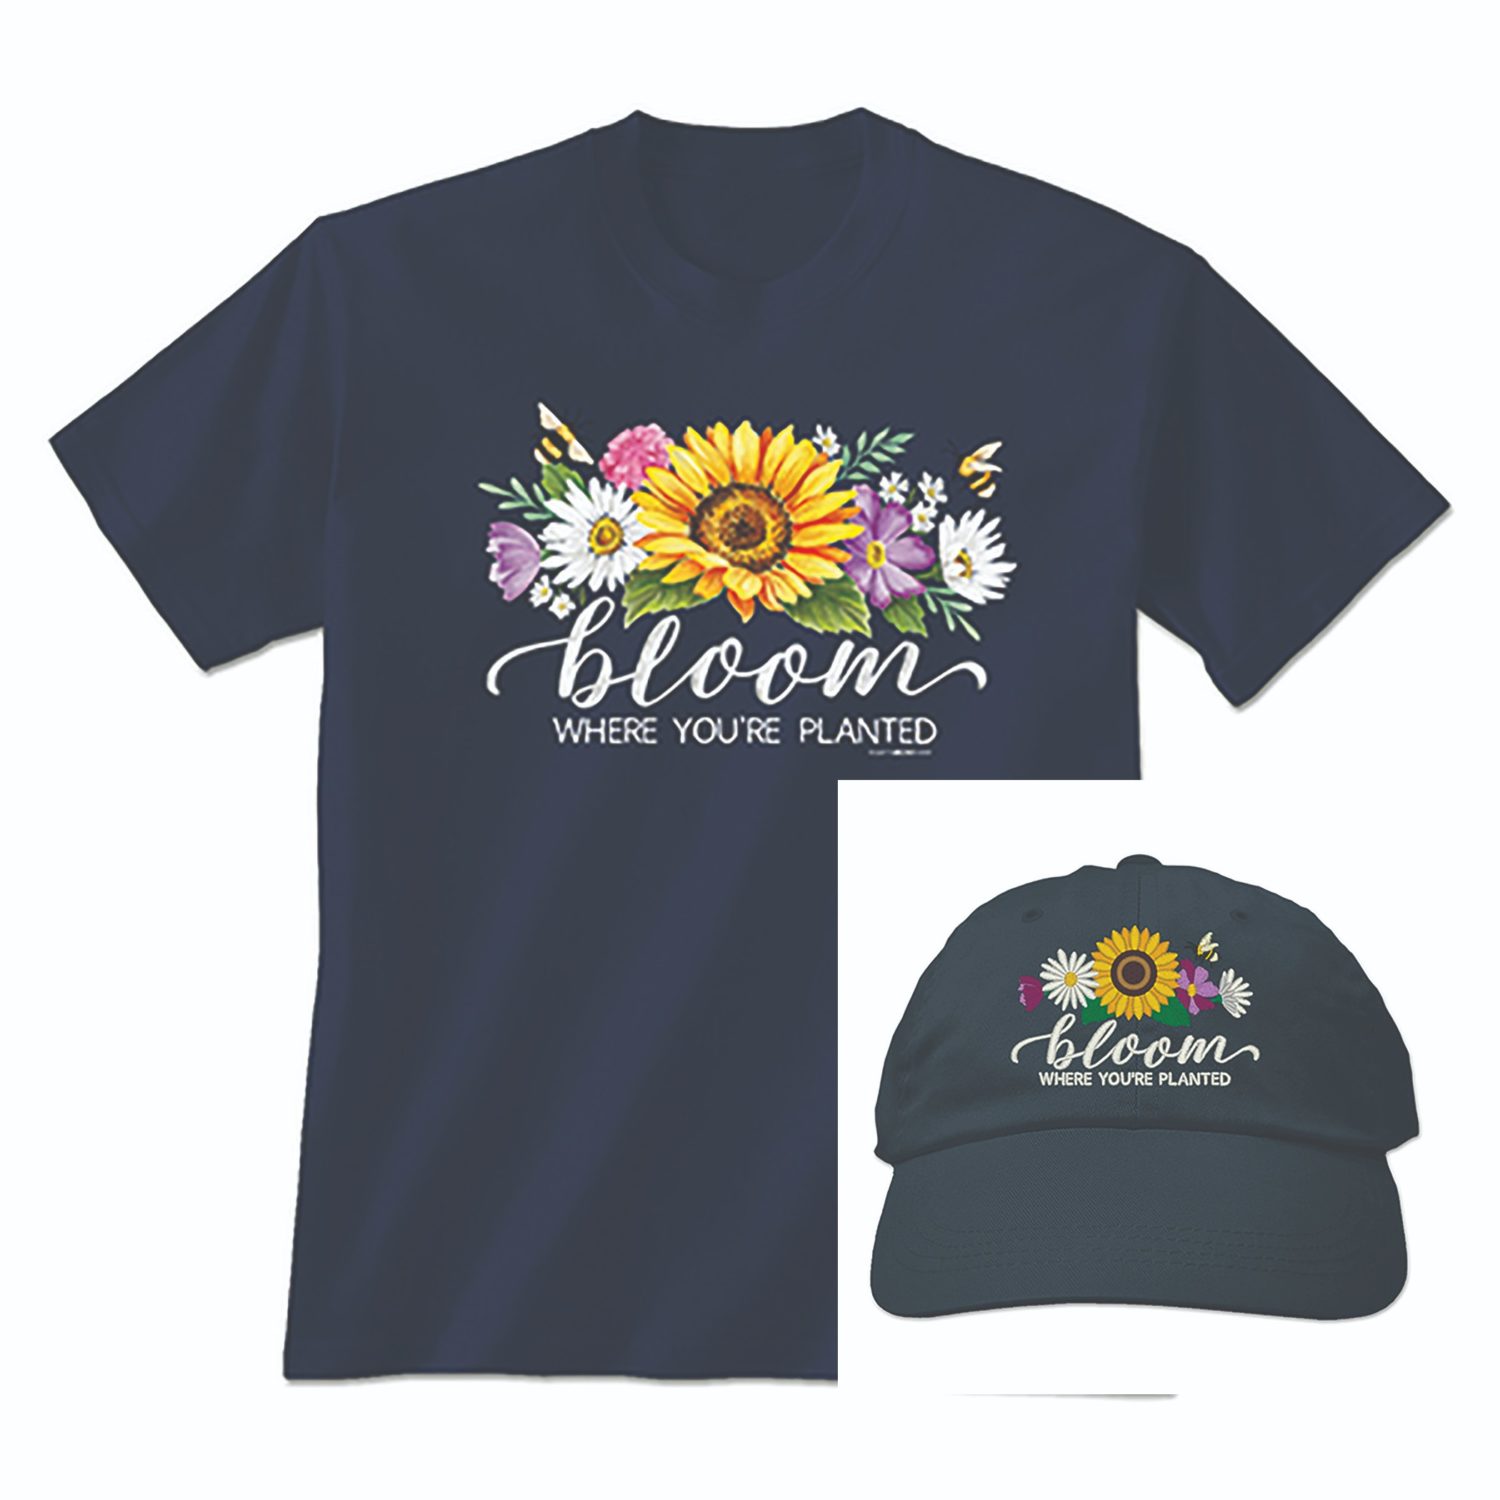 Earth Sun Moon Trading Co. Hat and T-Shirt